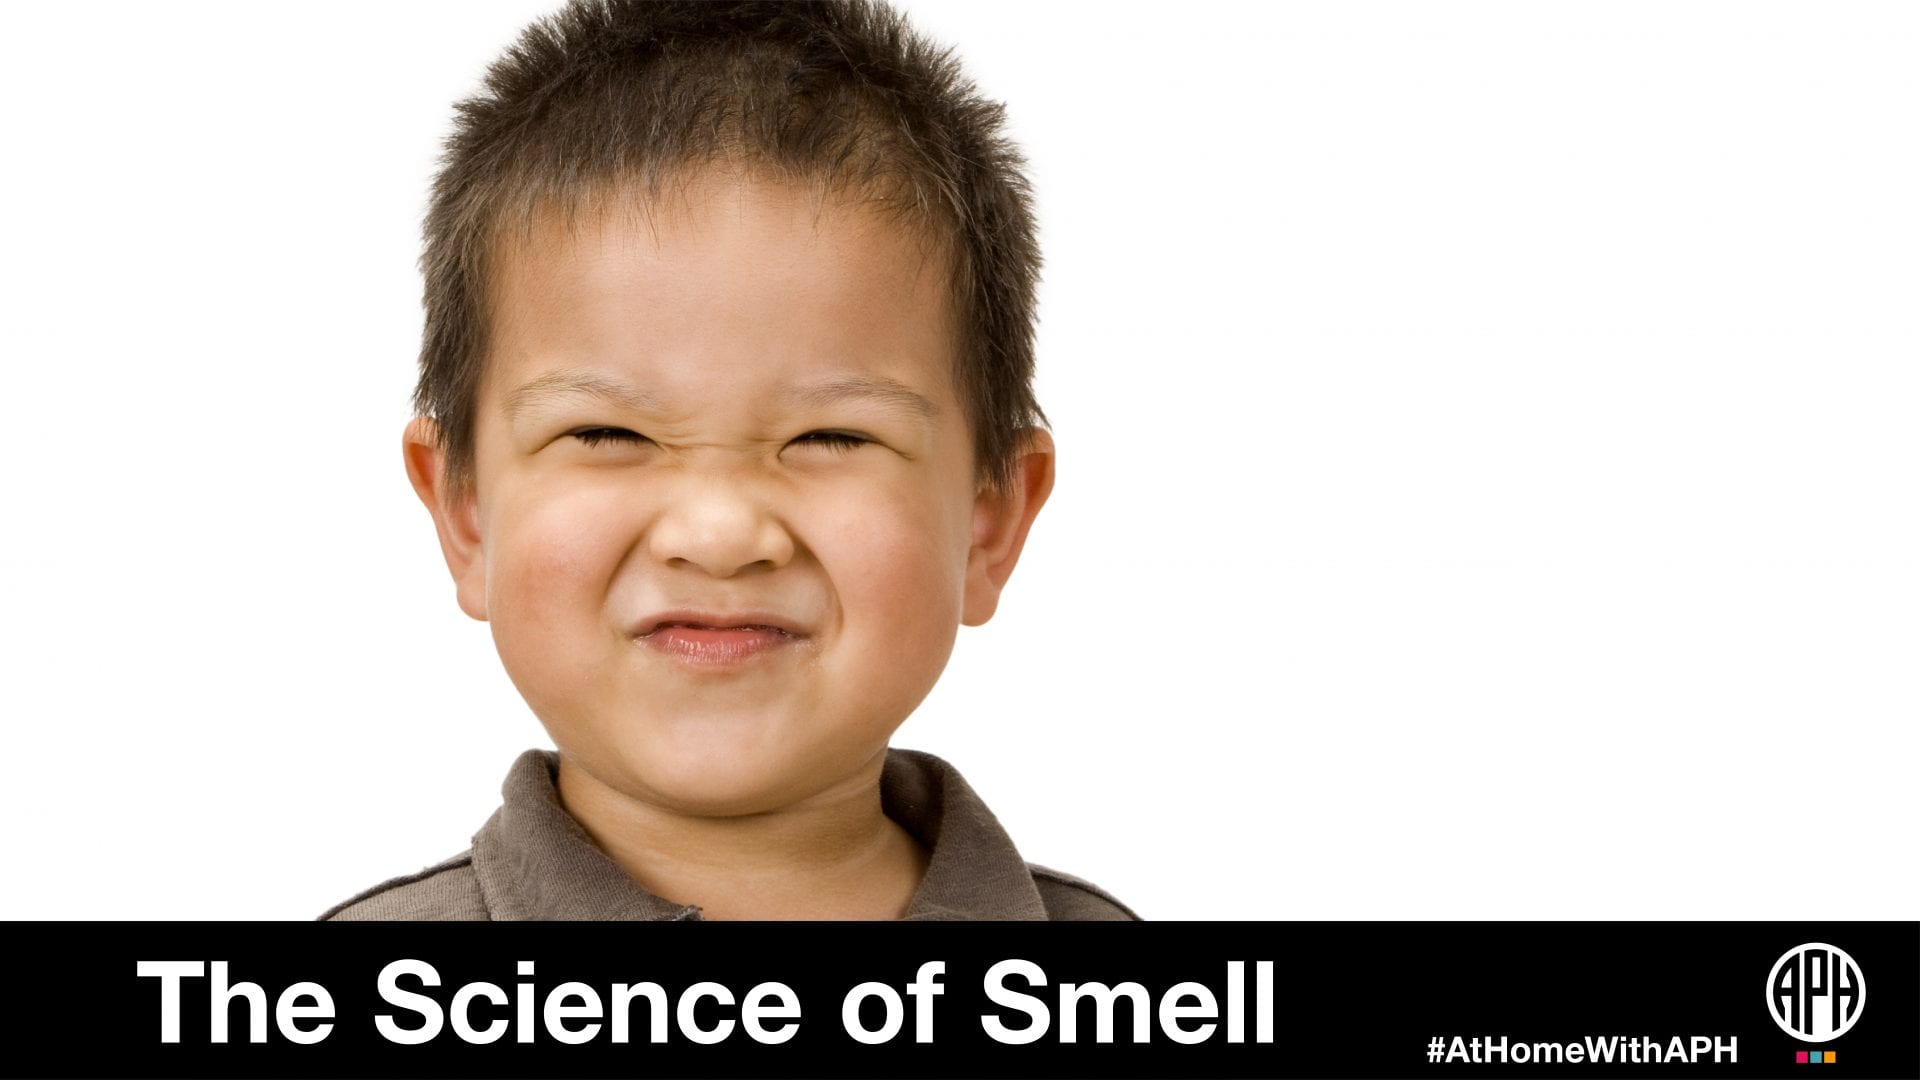 a little boy with his nose wrinkled. text reads "The Science of Smell. #AtHomeWithAPH"